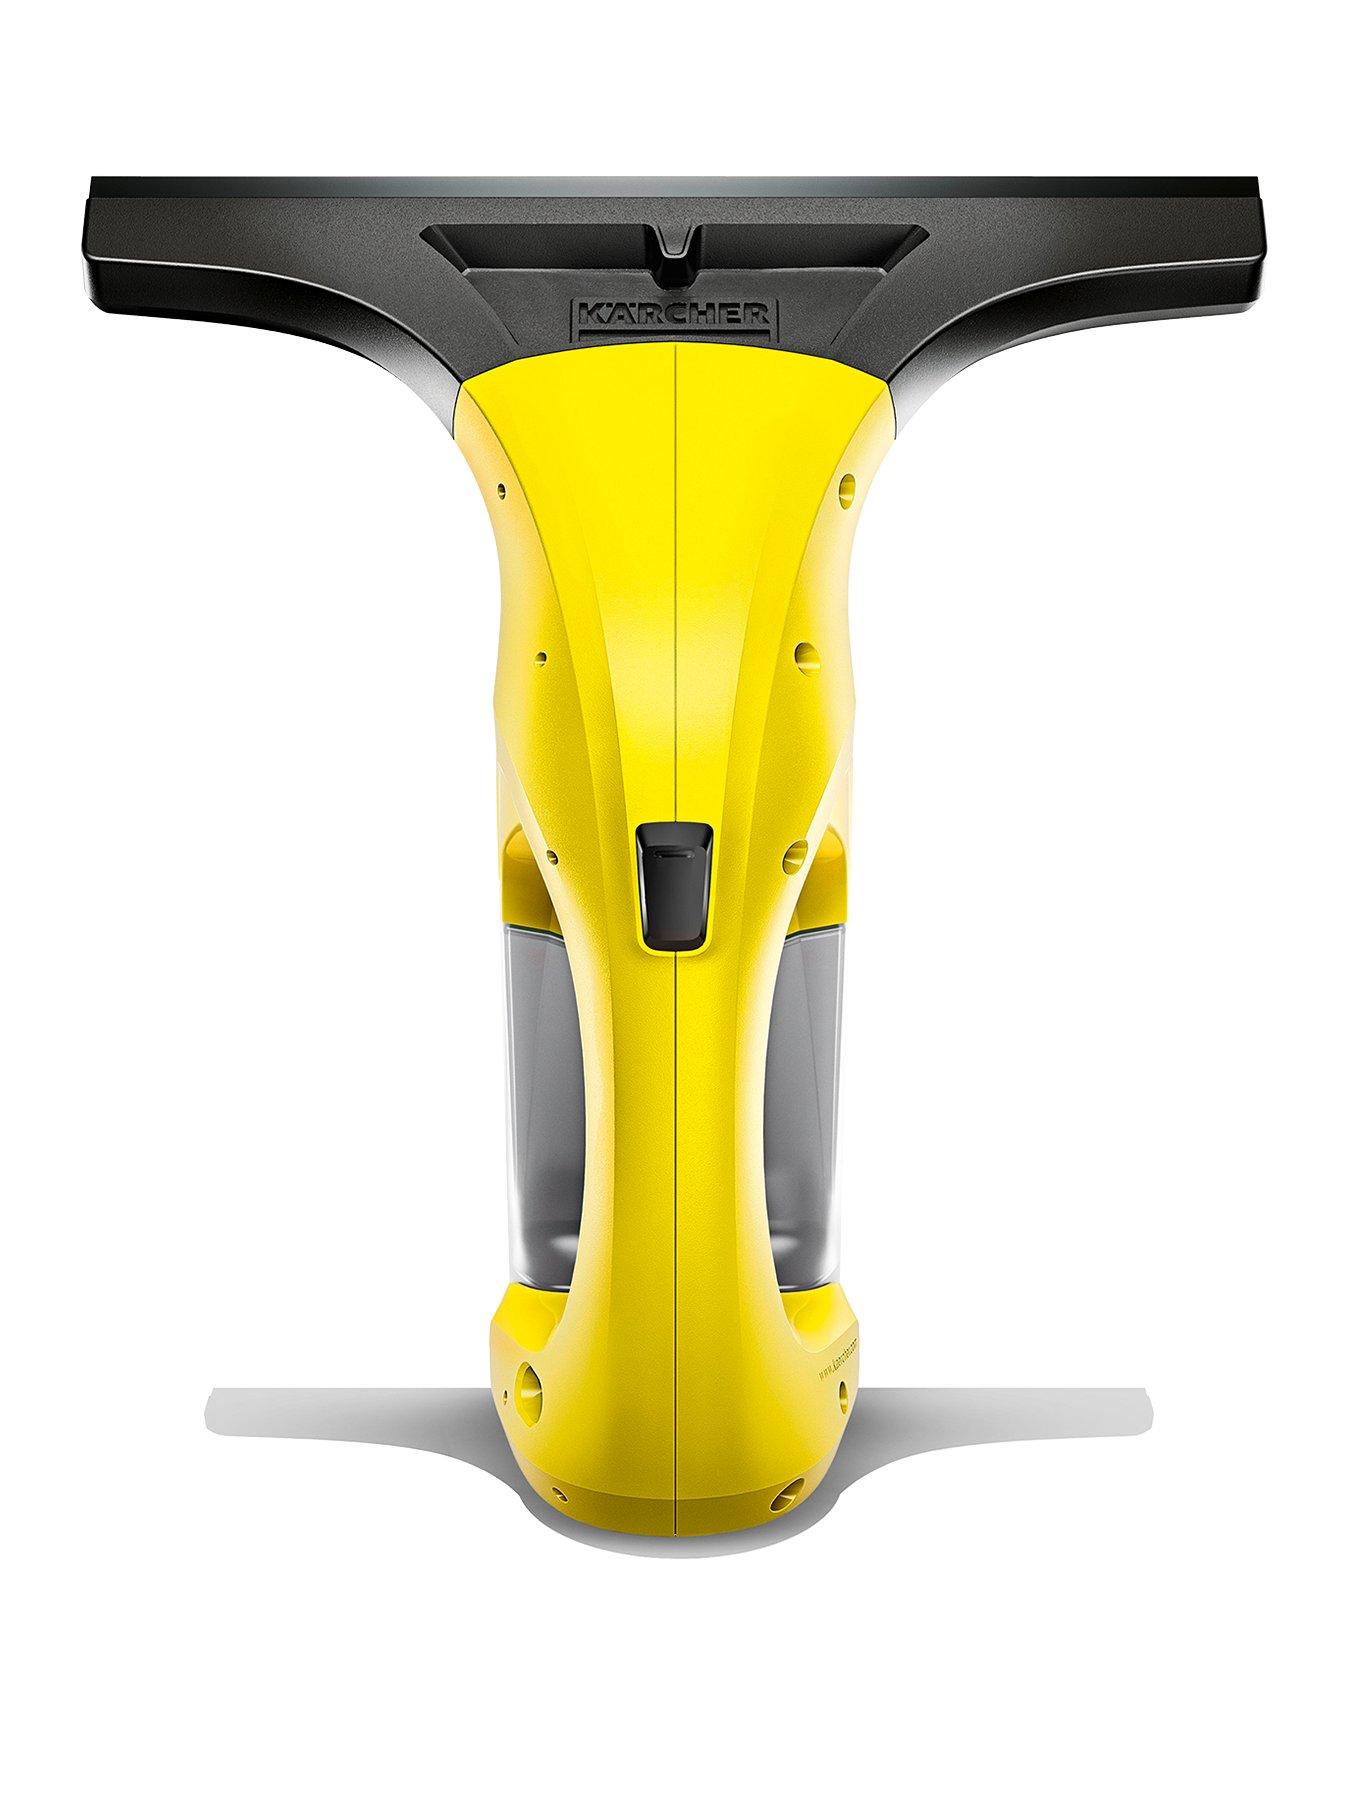 This on-sale Karcher window vacuum cleans windows, mirrors and shower  screens